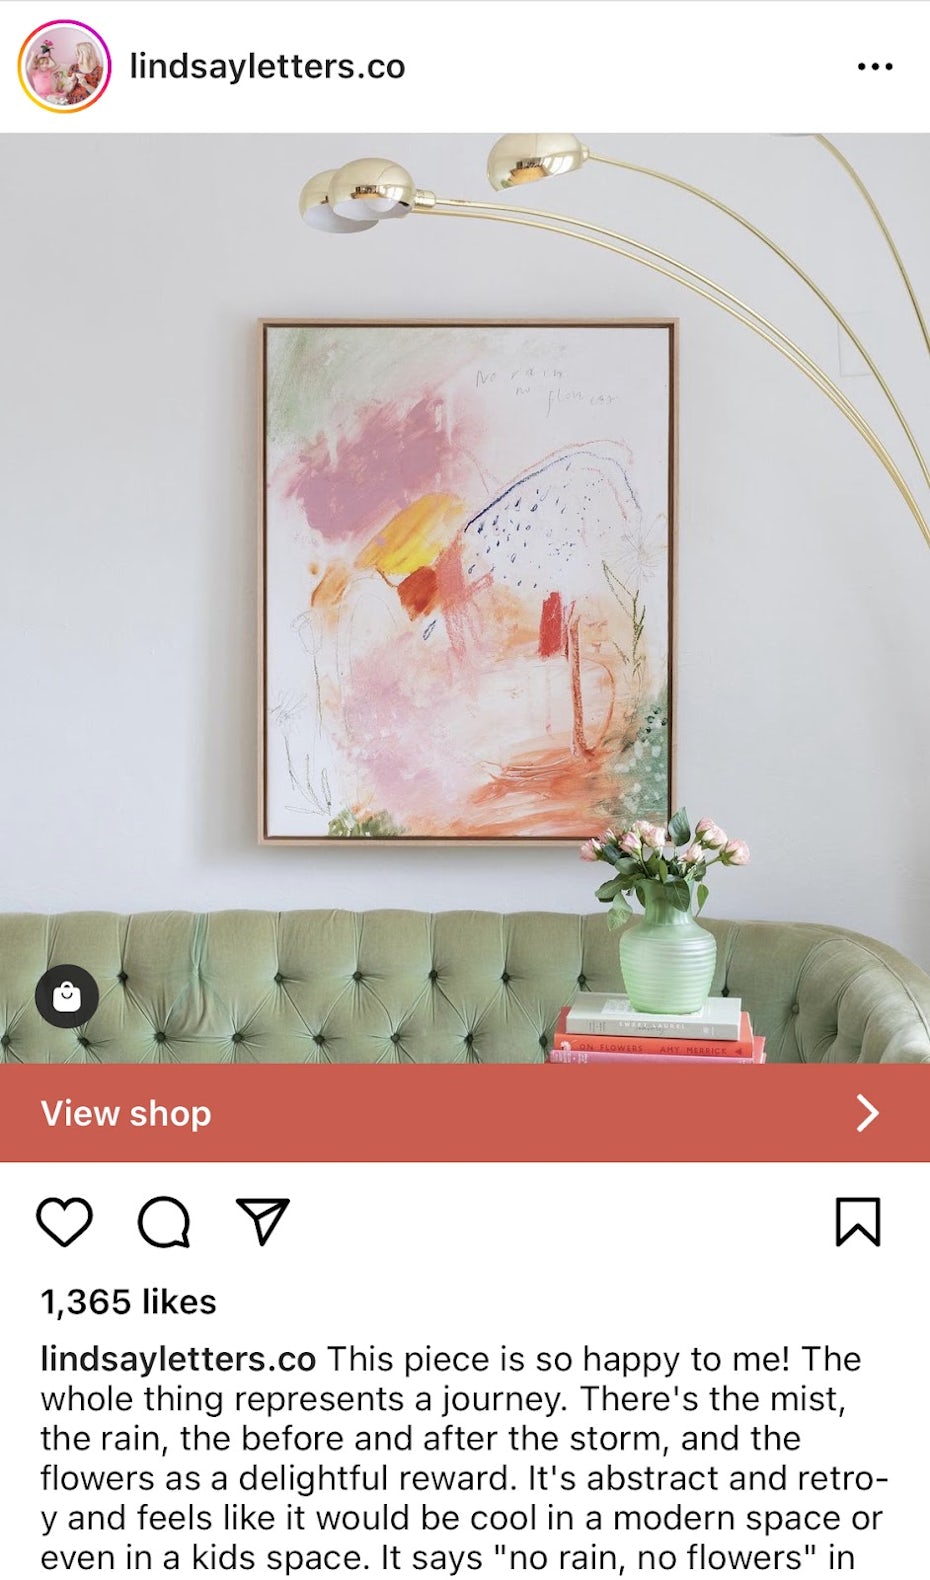 screenshot from the Instagram account of Lindsay letters showing an original art piece staged in a midcentury modern room